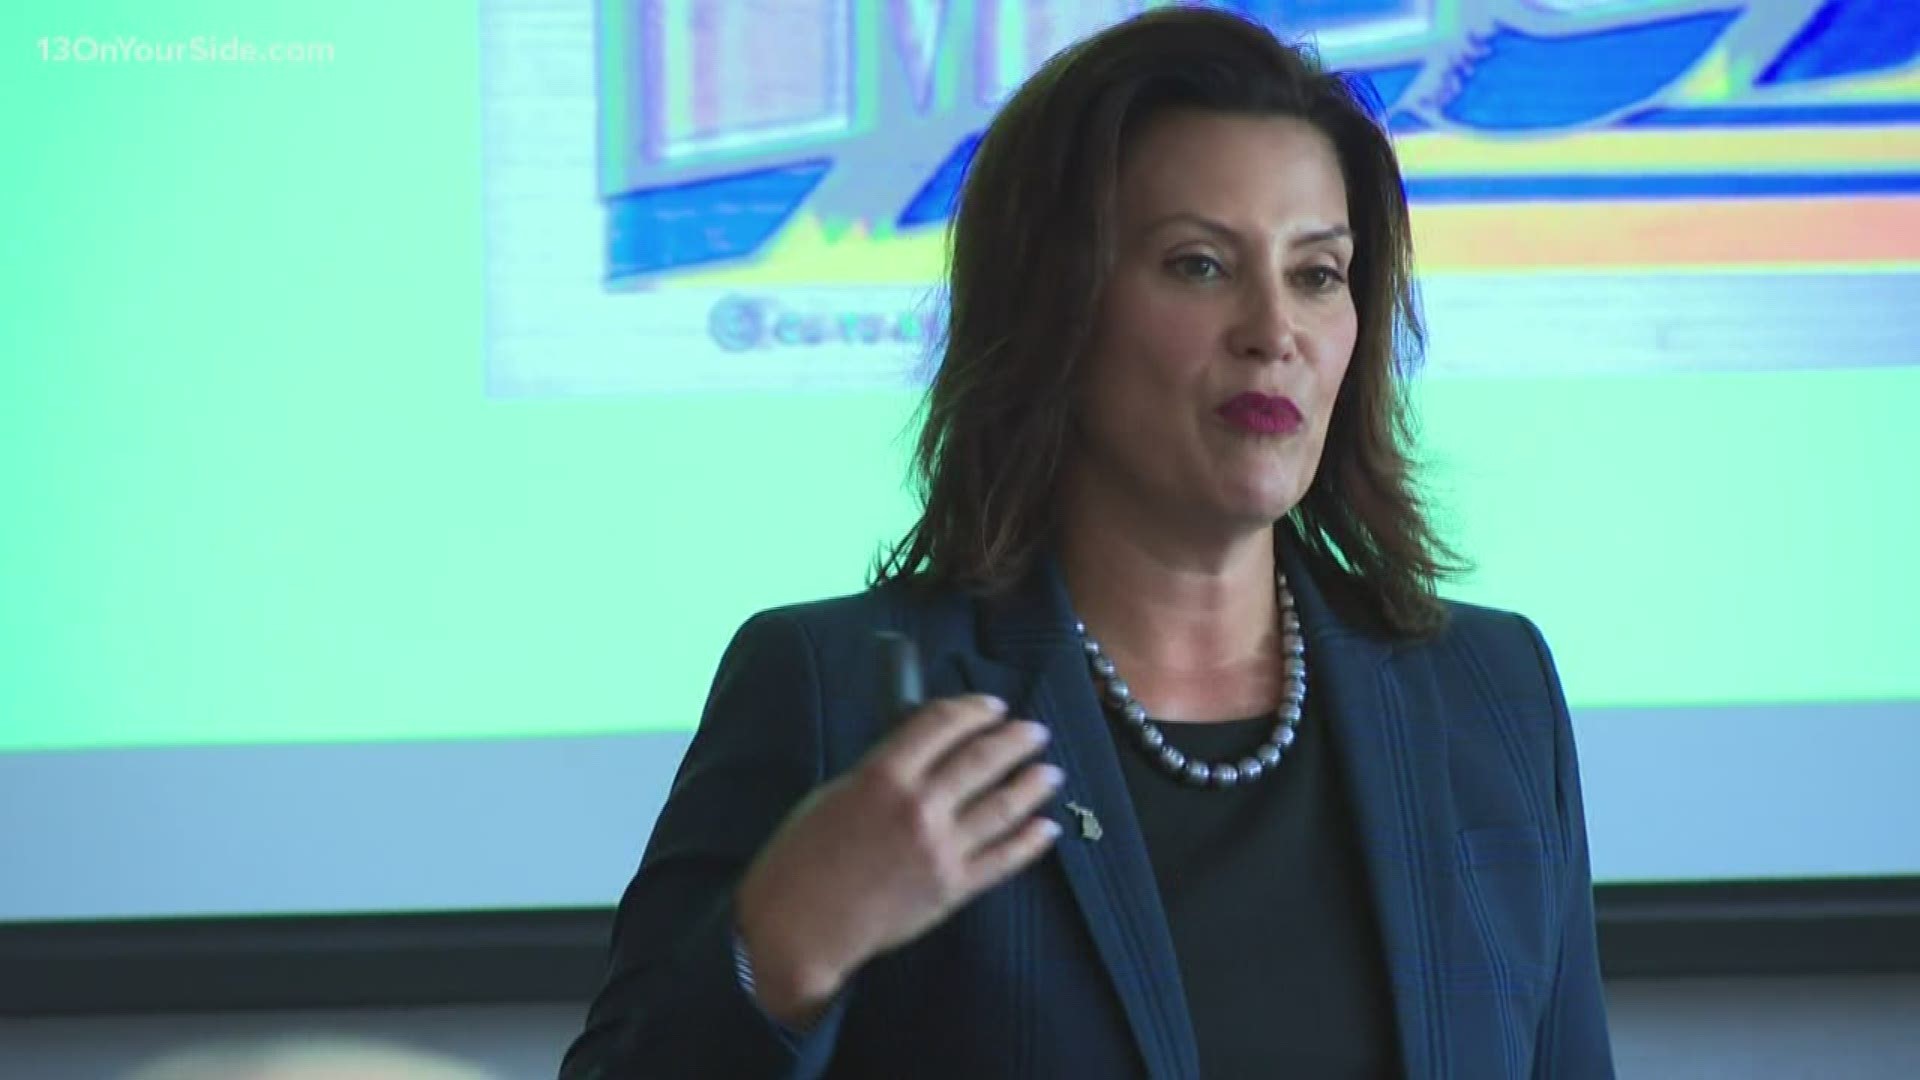 Republican legislative leaders agreed to a budget framework Thursday and intend to begin passing spending bills next week despite not having a deal with Democratic Gov. Gretchen Whitmer.